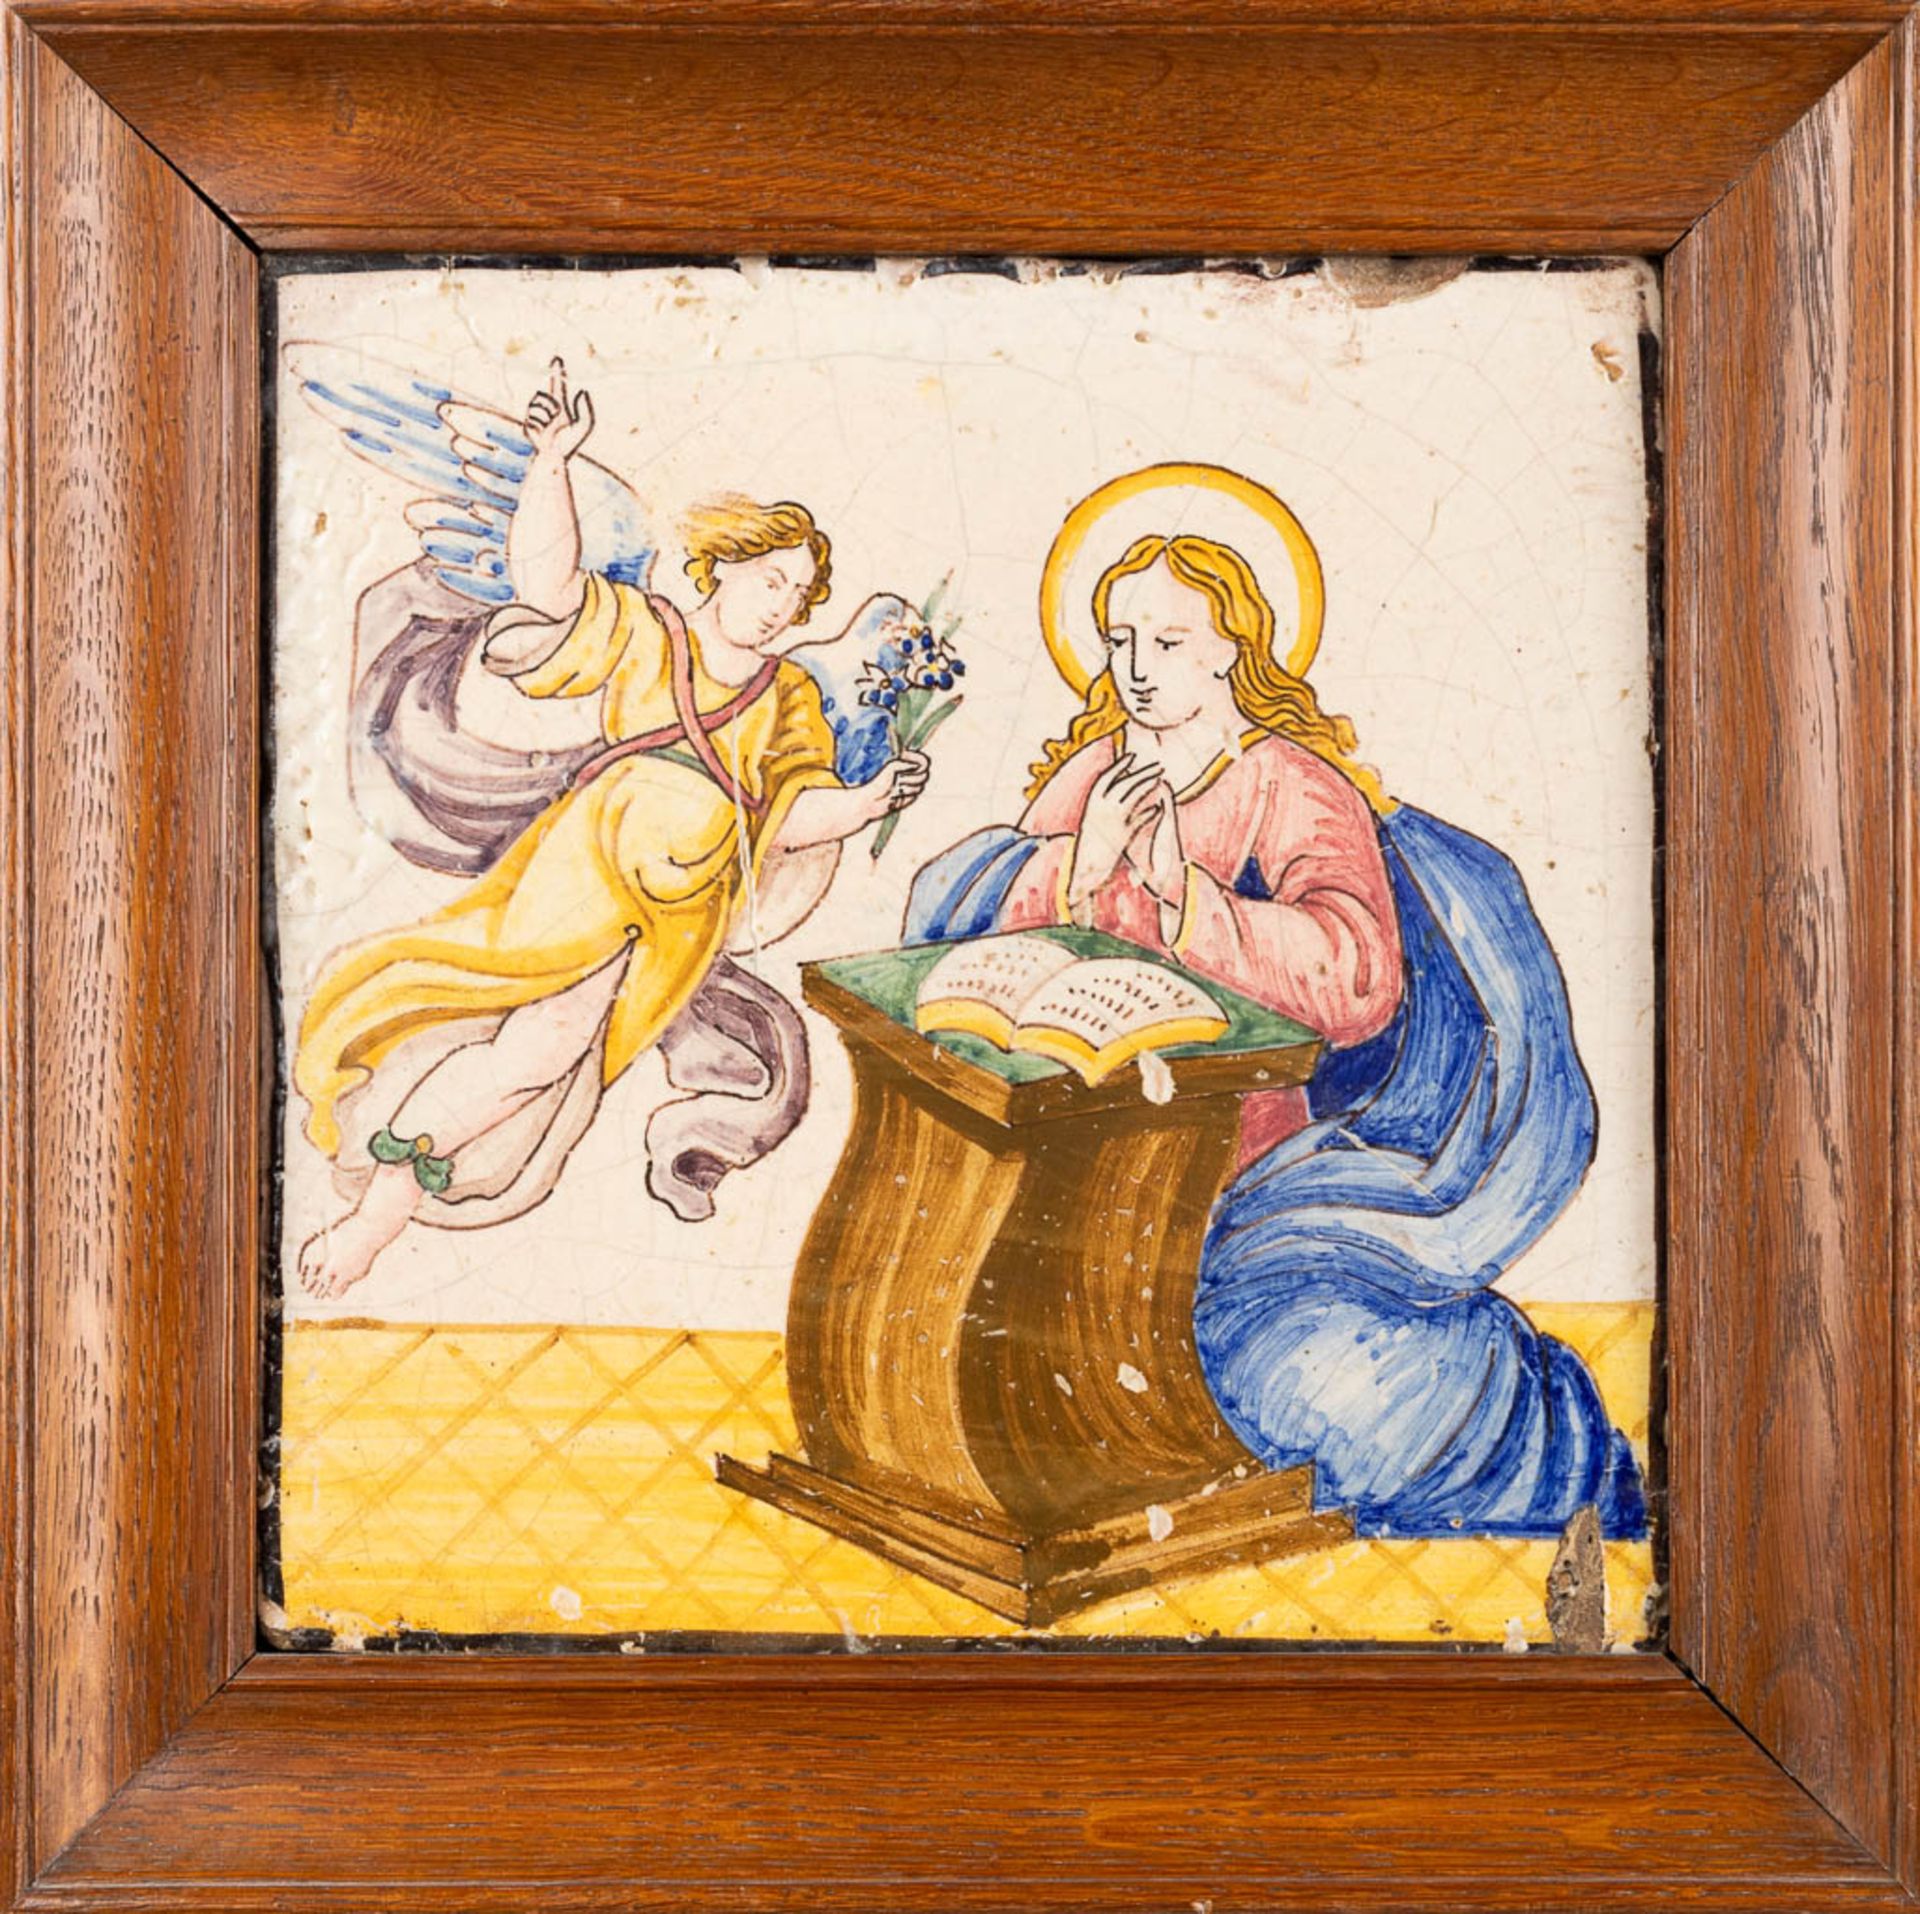 An antique framed tile, 'The Annunciation' by Archangel Gabriel. 18th C. (W:27 x H:27 cm) - Image 3 of 6